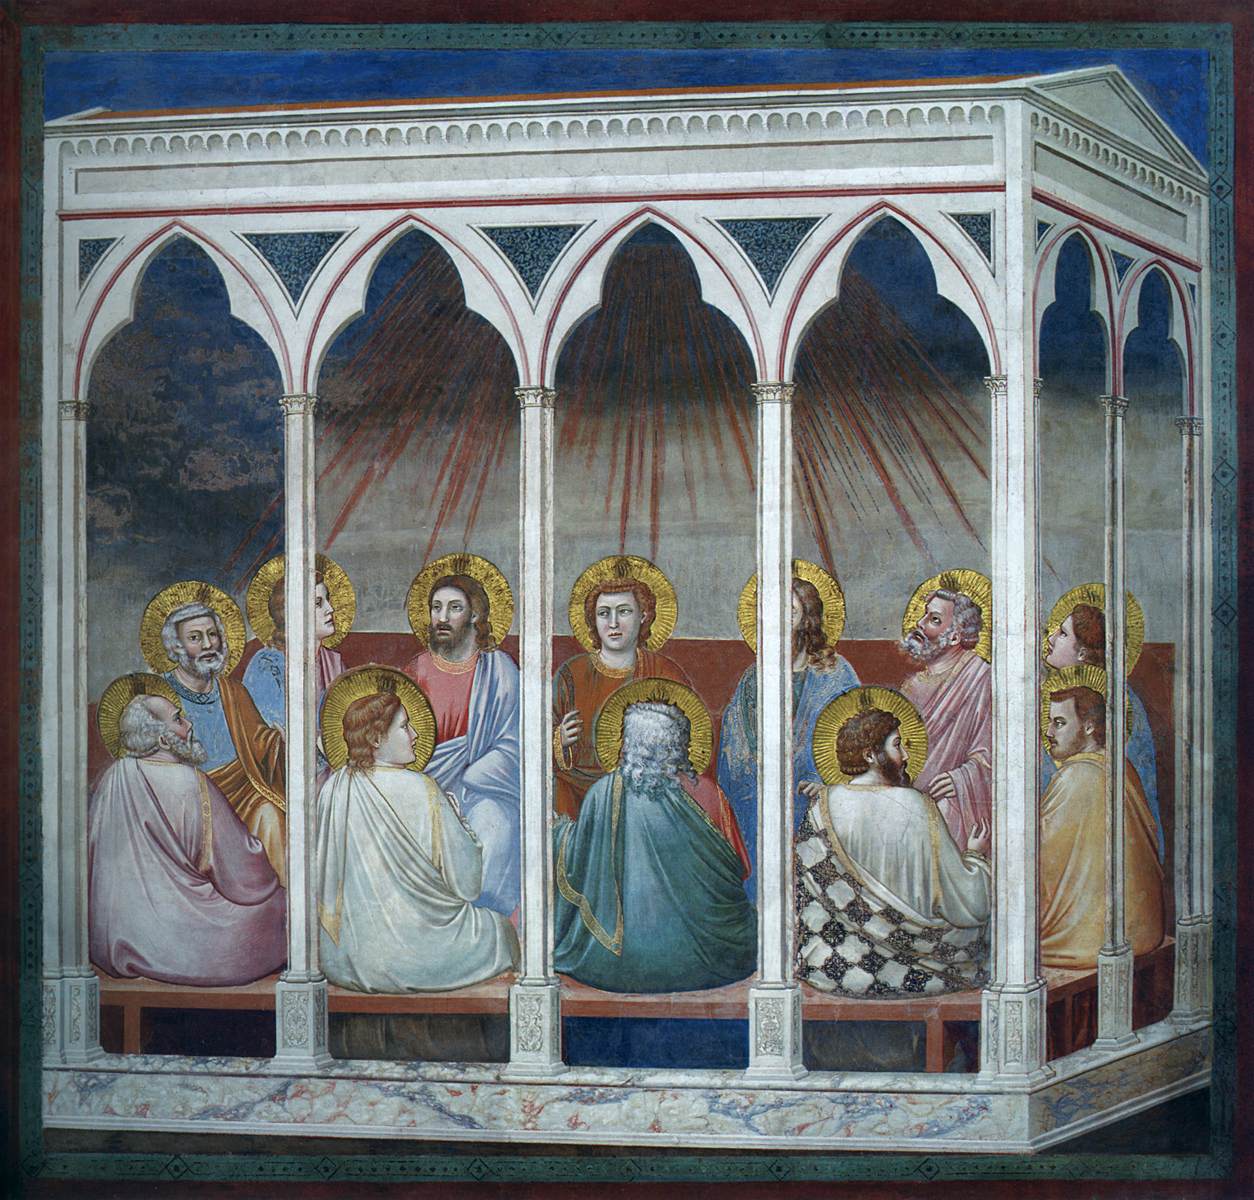 No 39 Scenes from the Life of Christ: 23 Pentecost